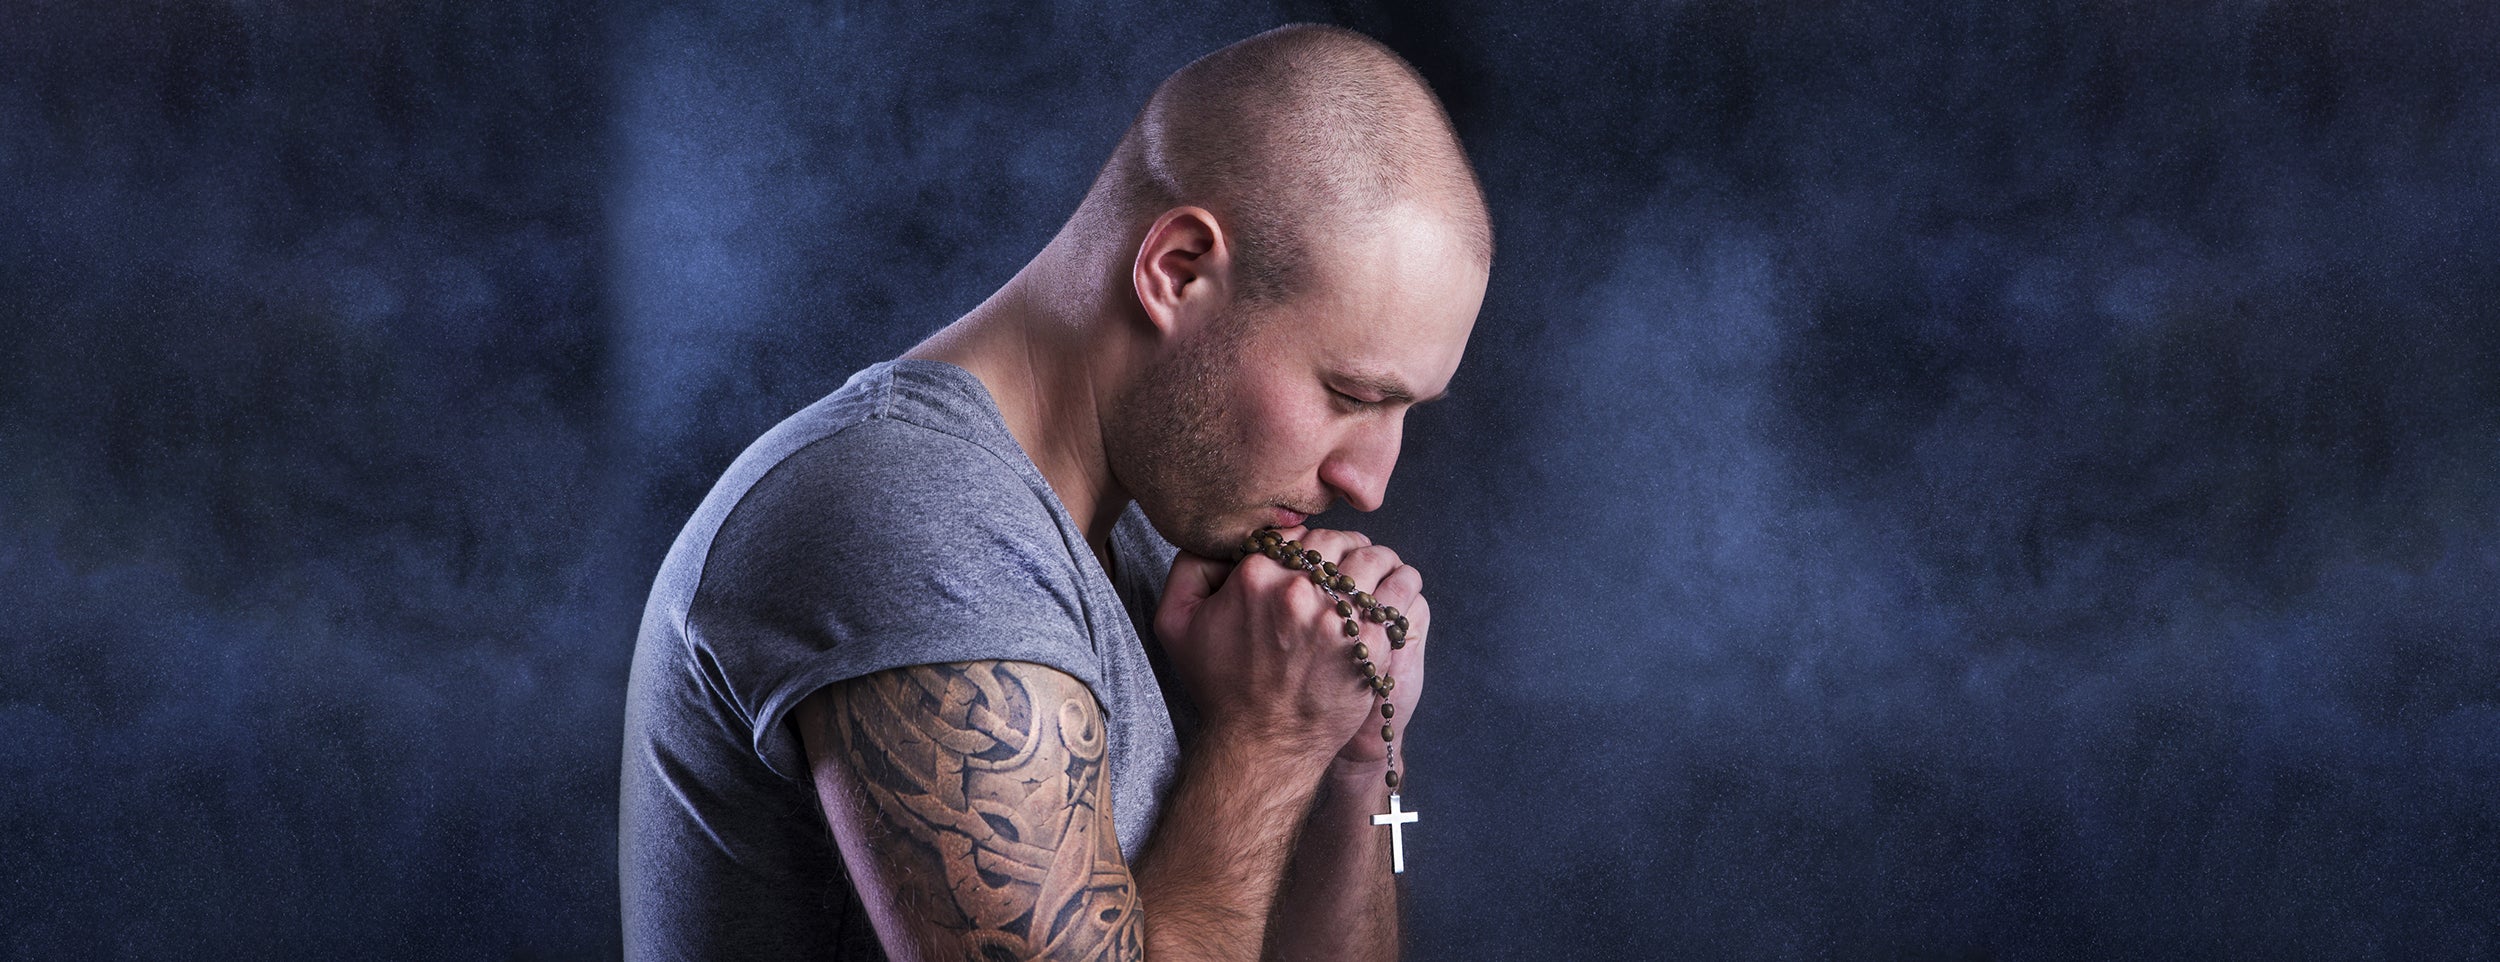 Tattoos are a Forgiven Sin for Christians